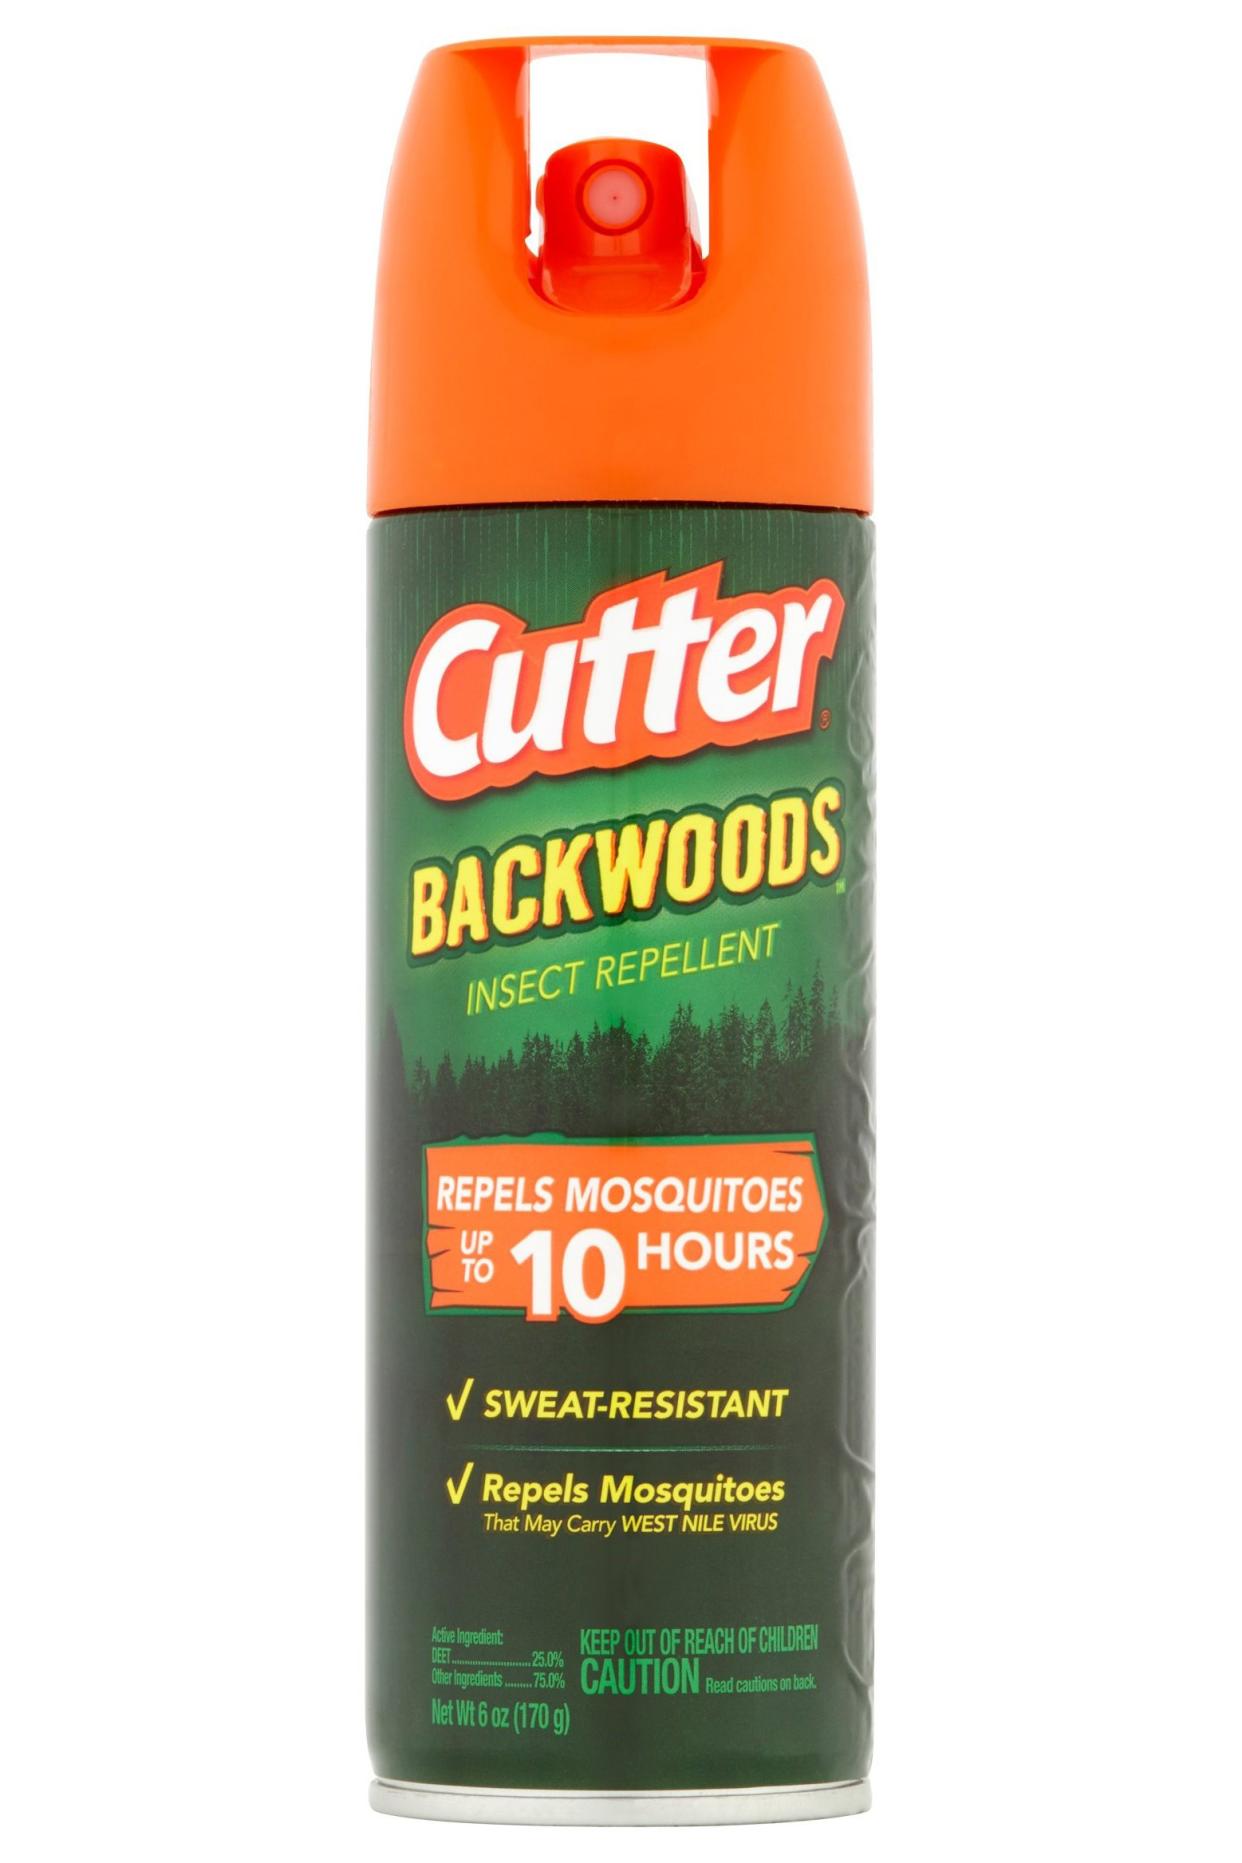 Cutter Backwoods Insect Repellent